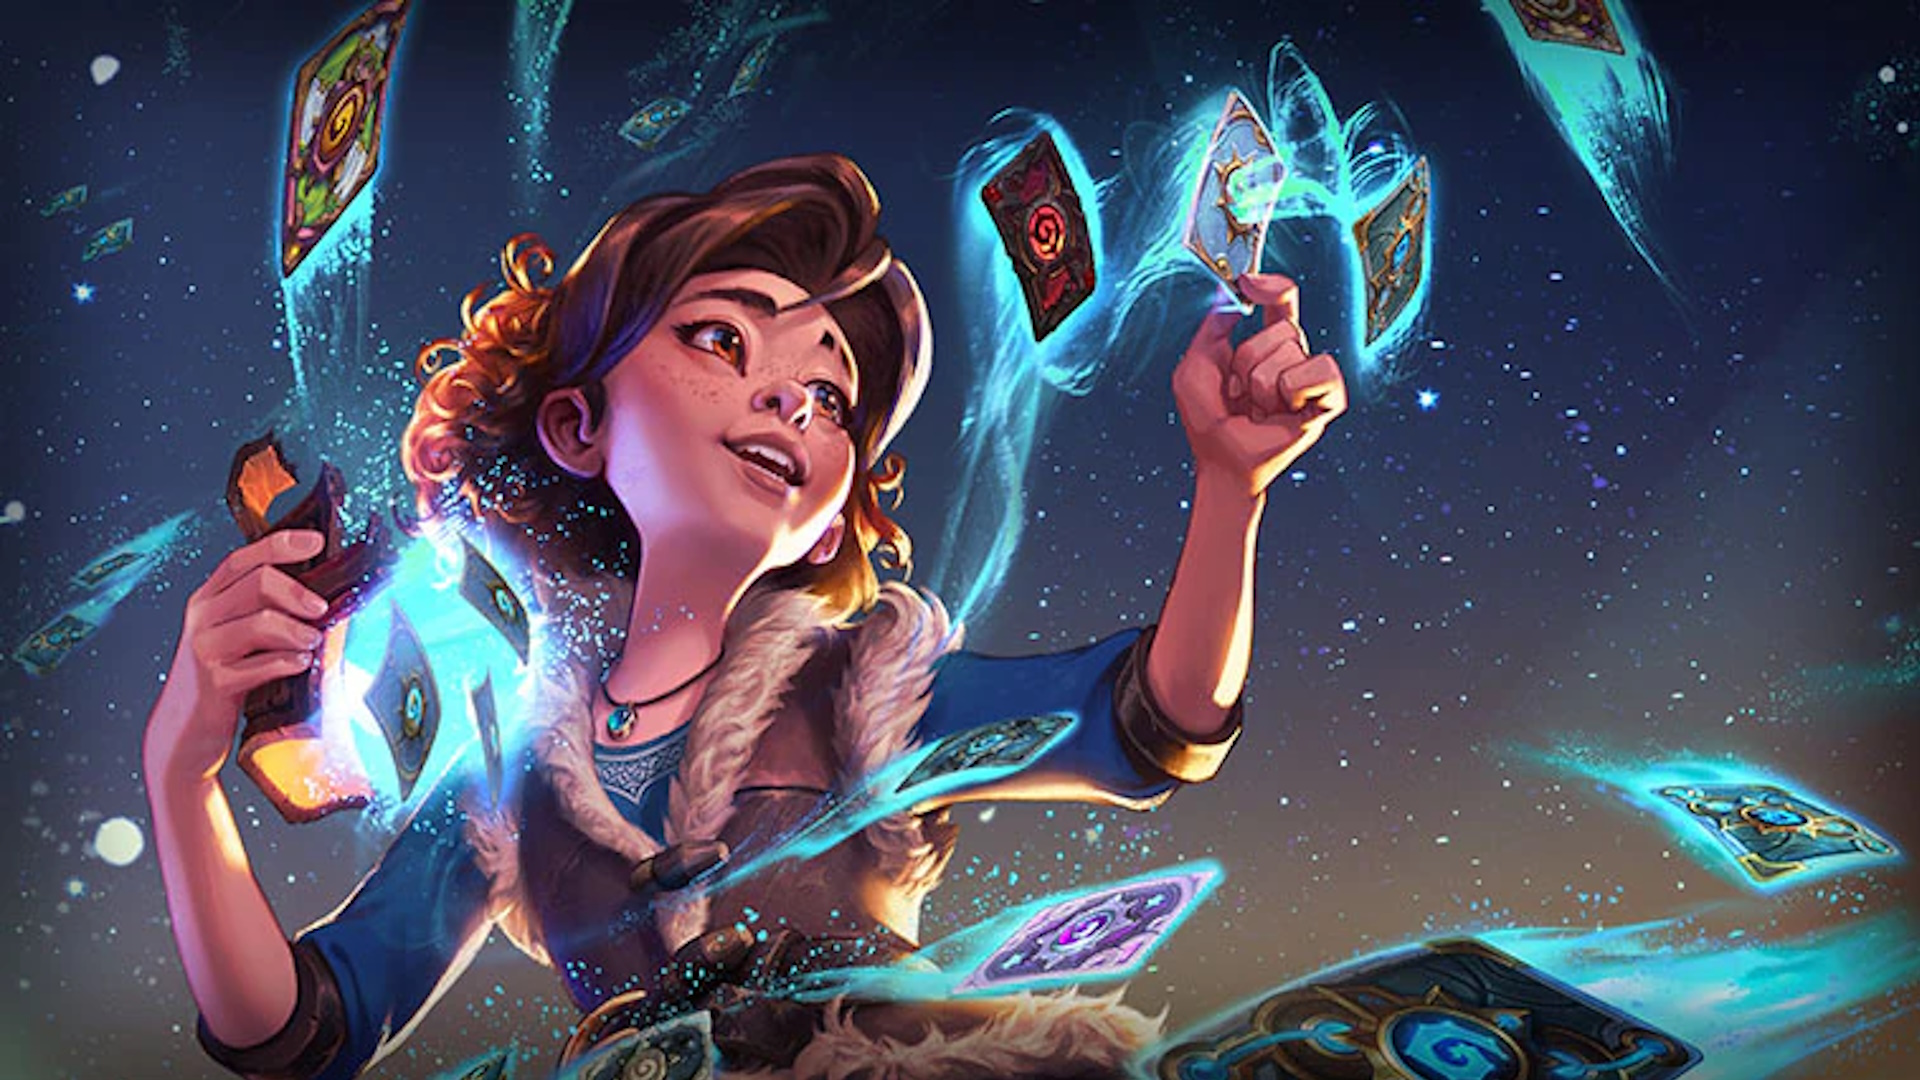 Hearthstone teams up with Prime Gaming to deliver a Legendary loot